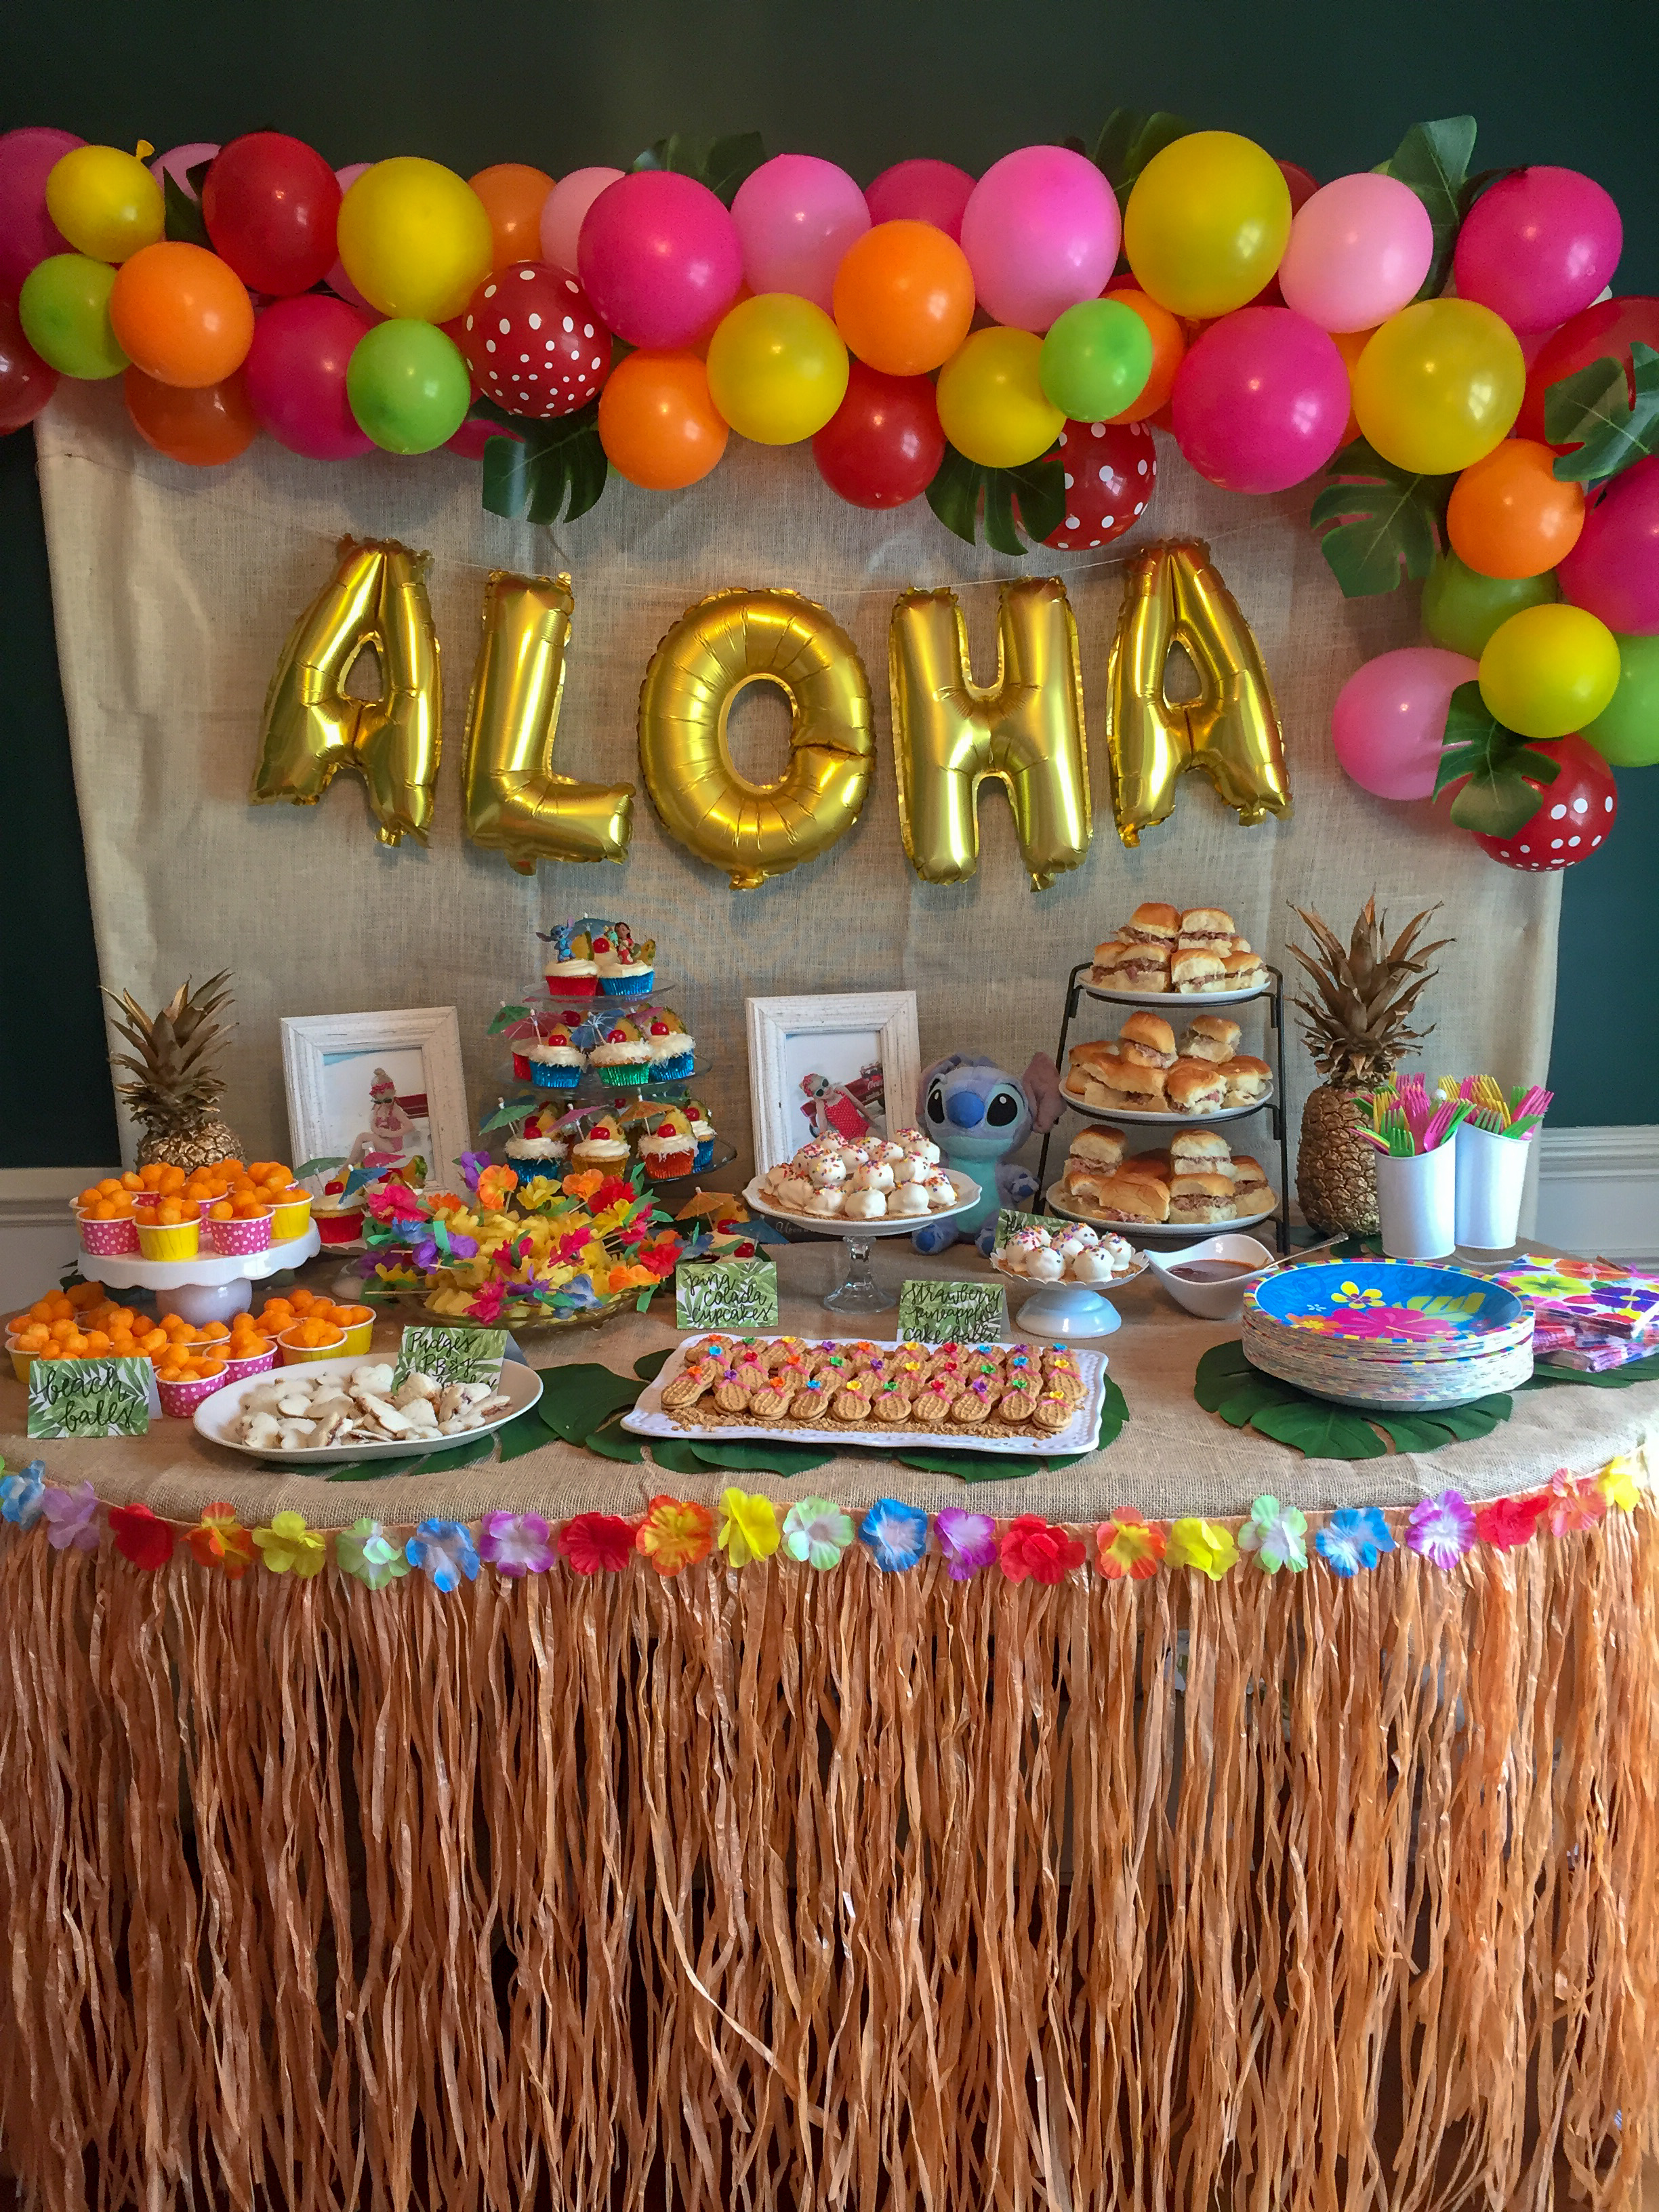 Lilo and Stitch Birthday Party Decorations